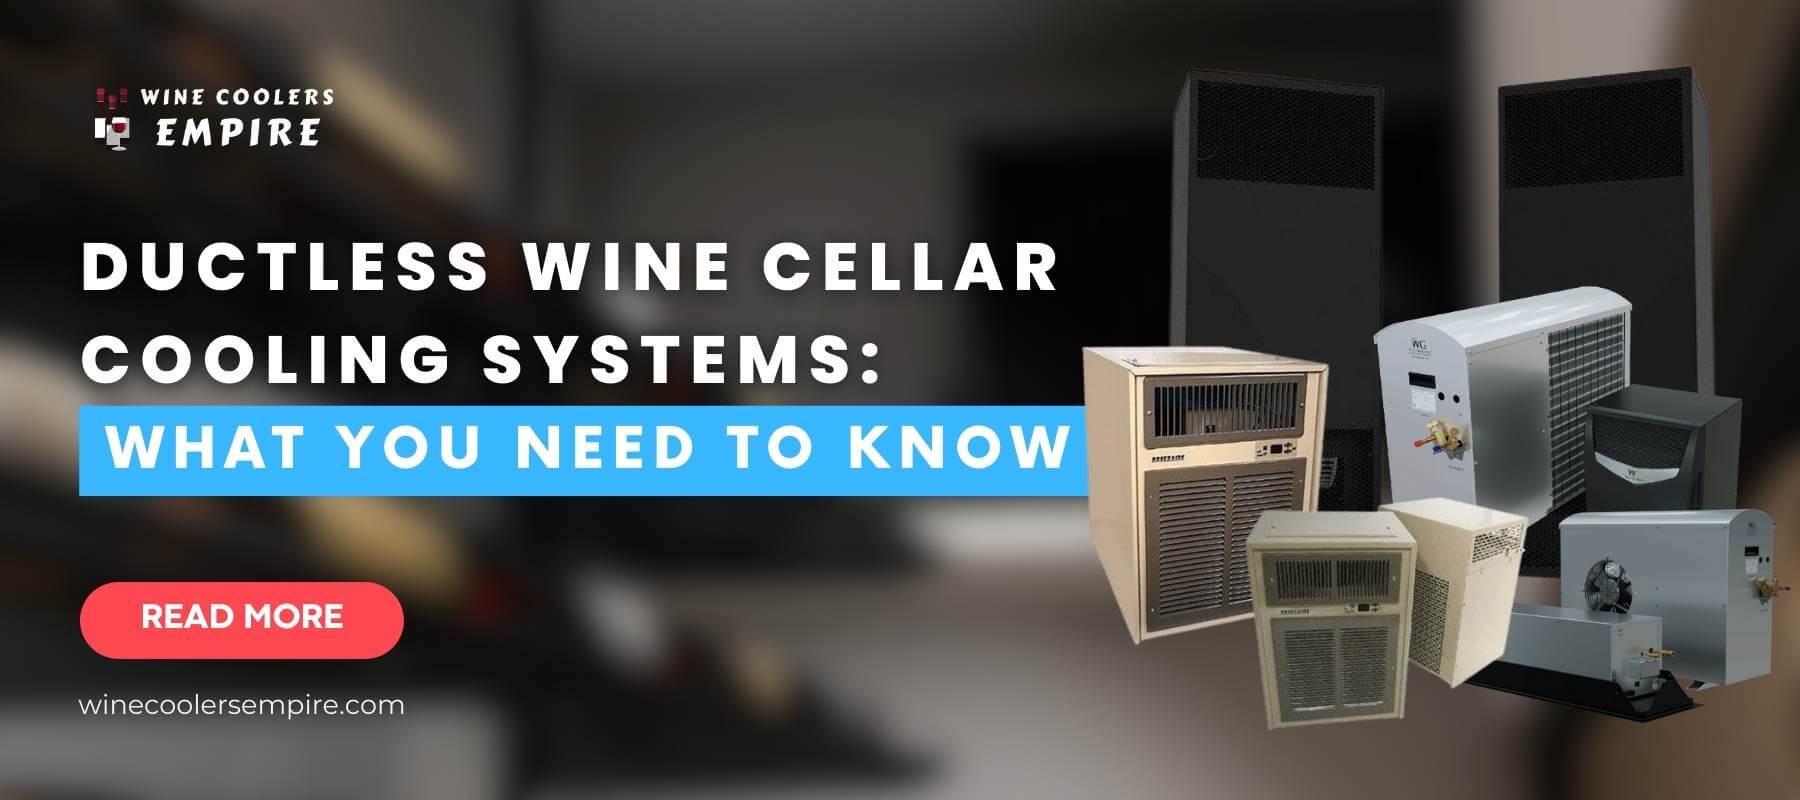 Ductless Wine Cellar Cooling Systems: What You Need to Know